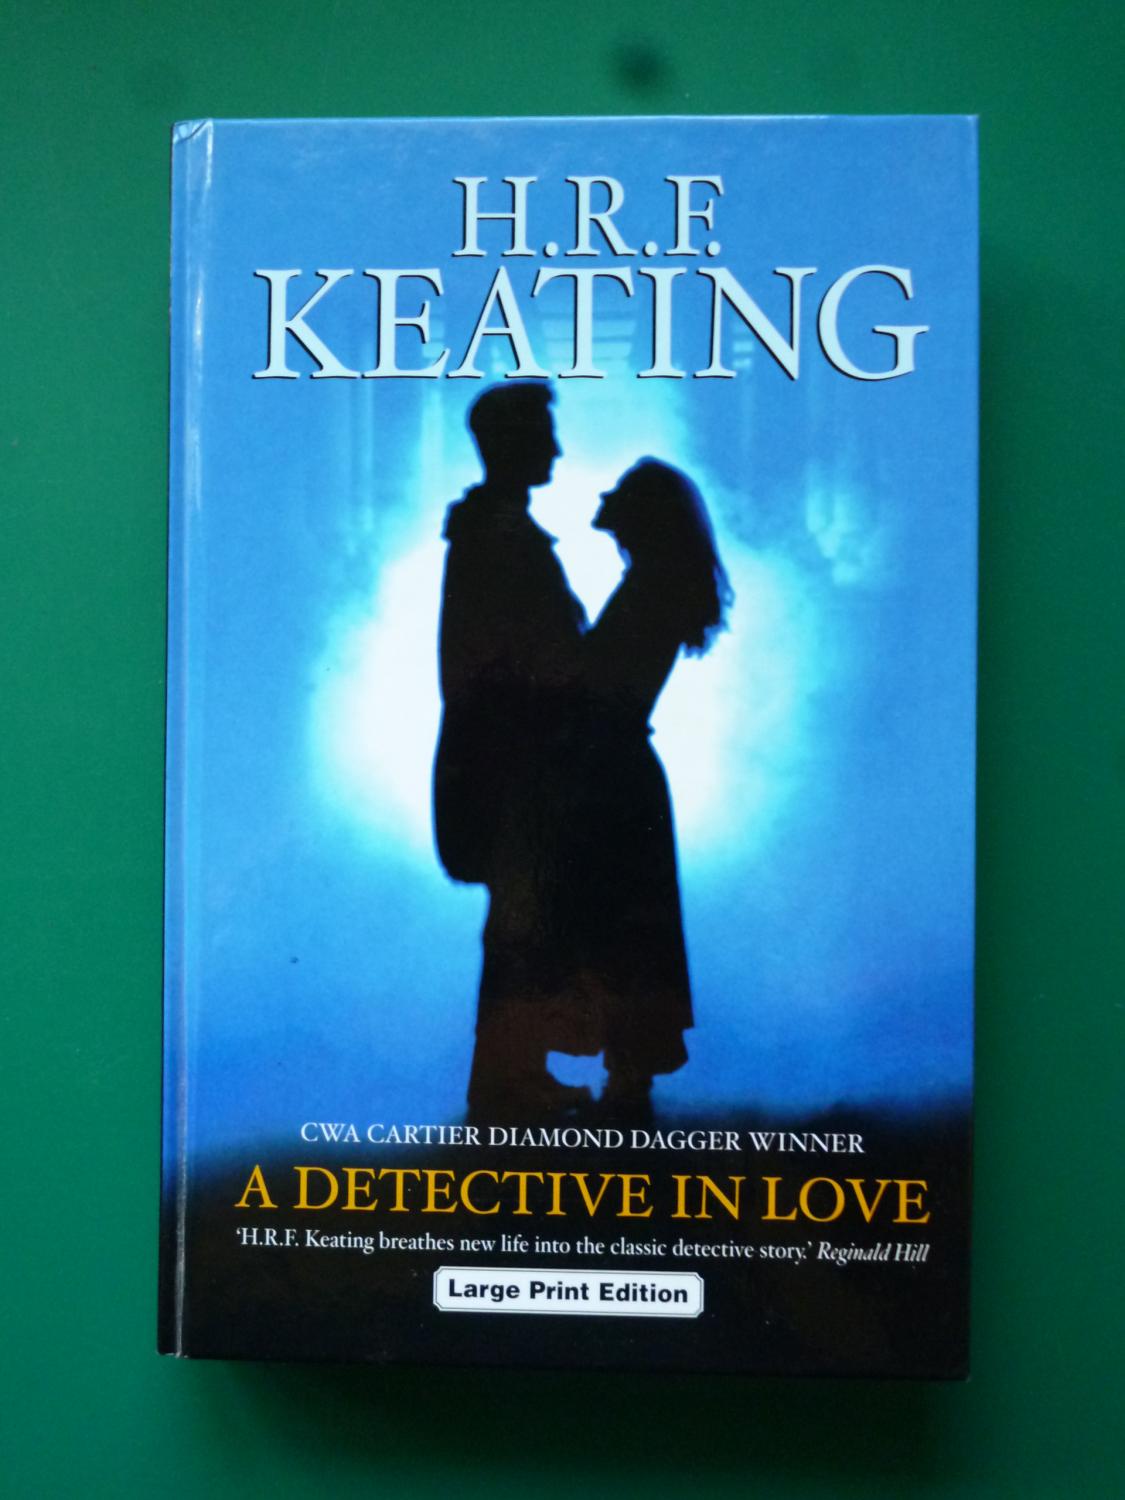 A Detective In Love (Large Print Edition) - H.R.F.Keating